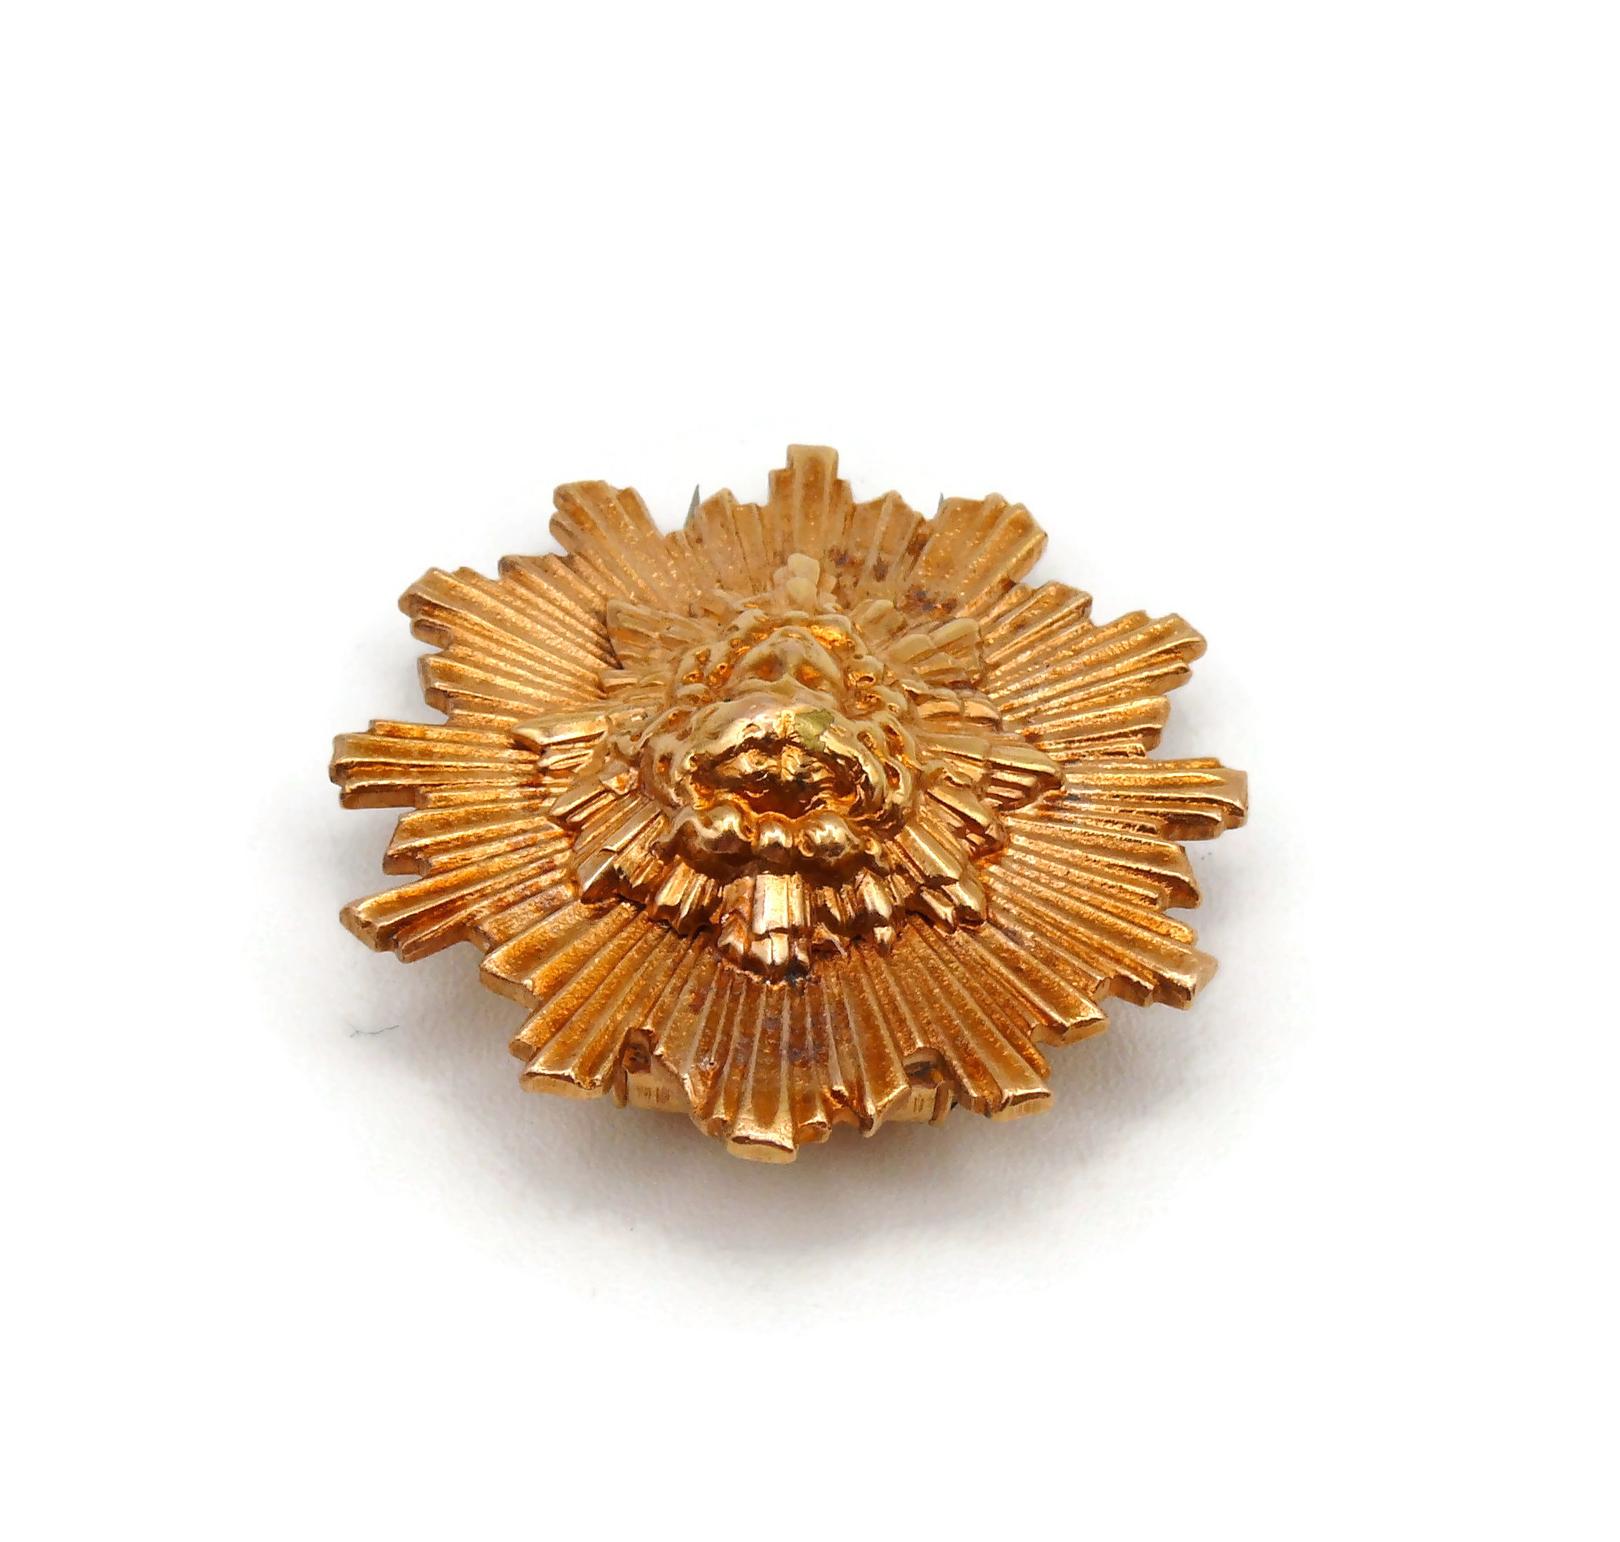 HERMES Vintage Gold Toned Sun King Apollo Clip Brooch 2